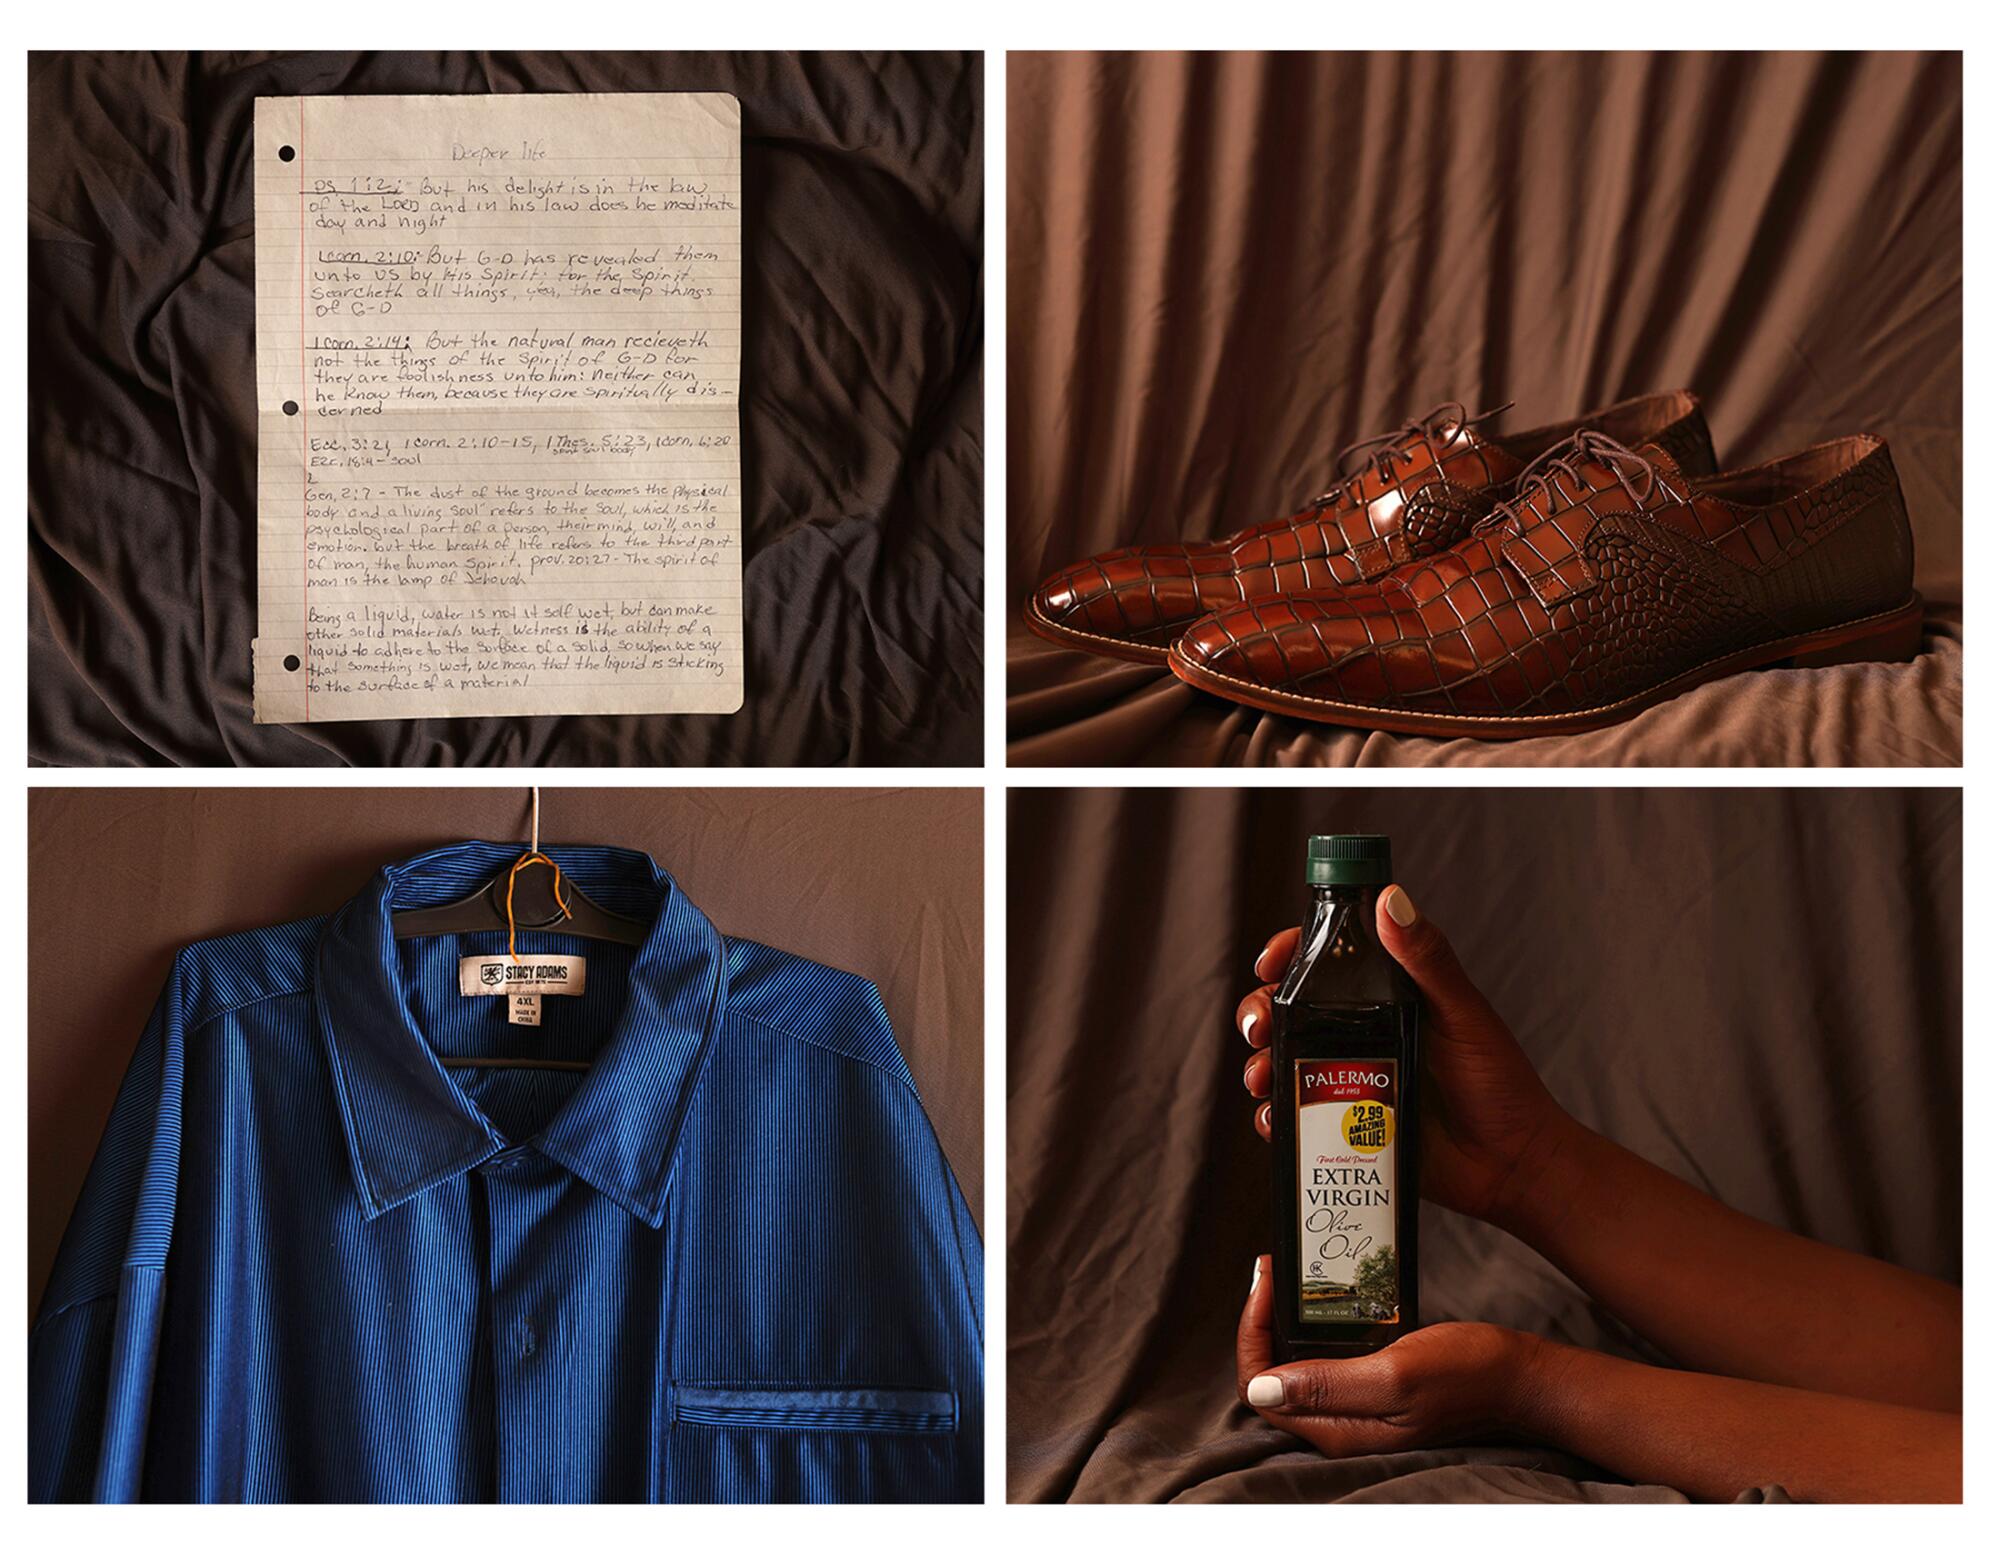 Four photos: a page of handwritten notes, a pair of brown shoes, a blue collared shirt, and a bottle of olive oil